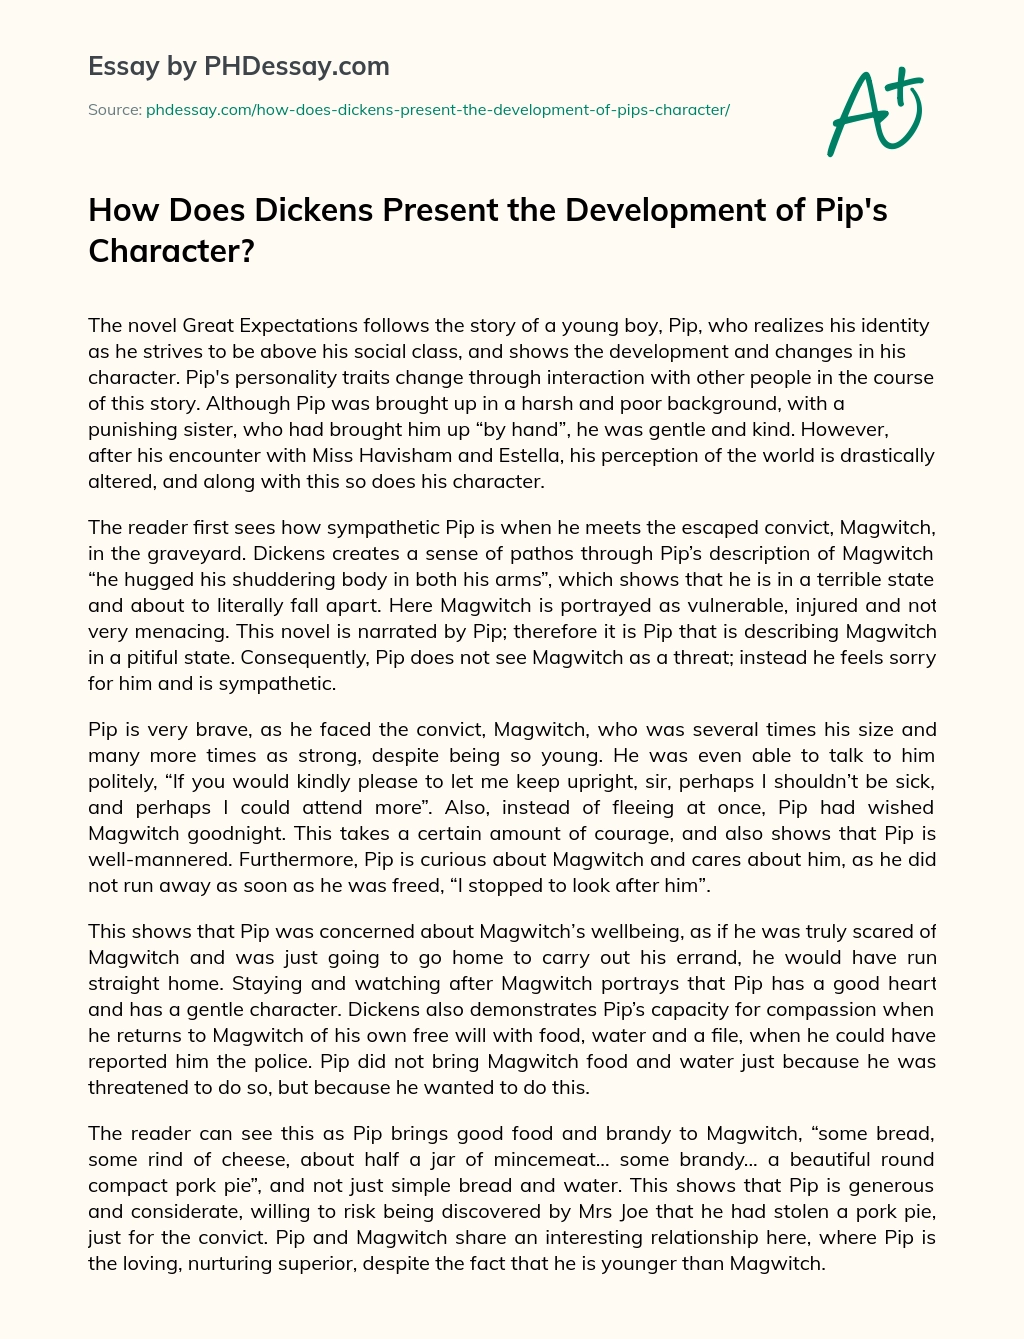 How Does Dickens Present the Development of Pip’s Character? essay